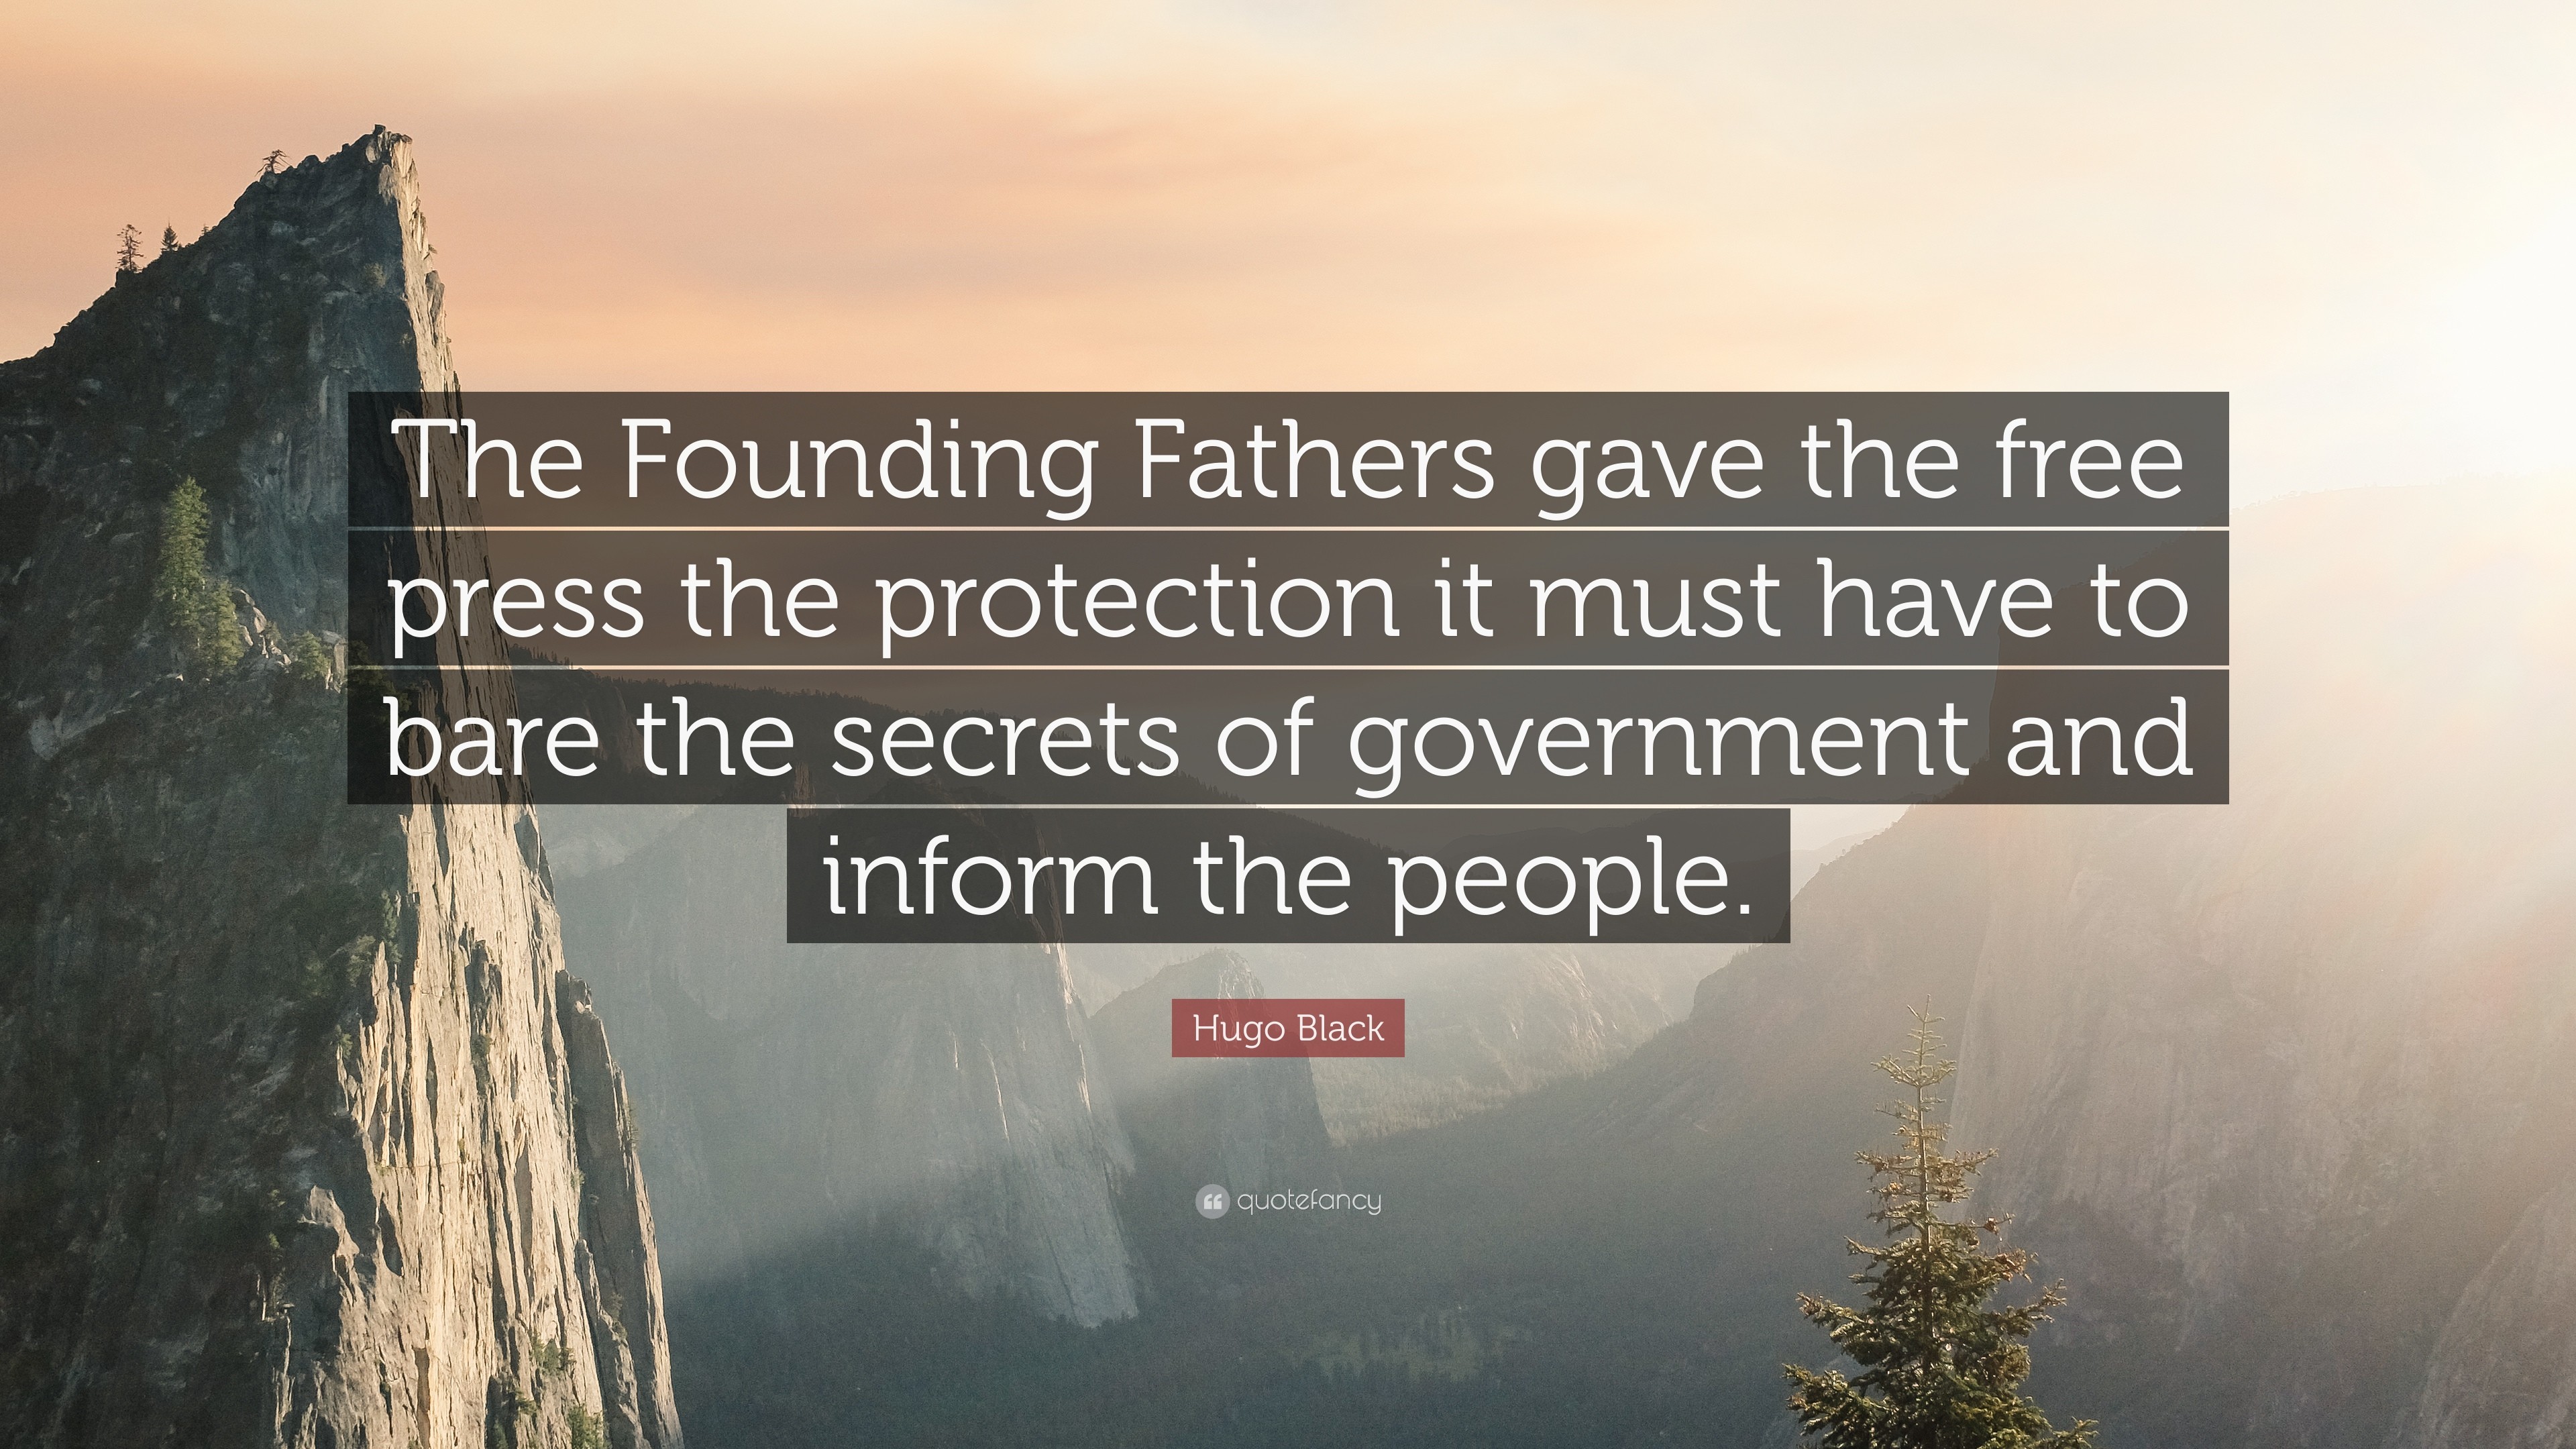 3840x2160 Hugo Black Quote: “The Founding Fathers gave the free press the protection  it must